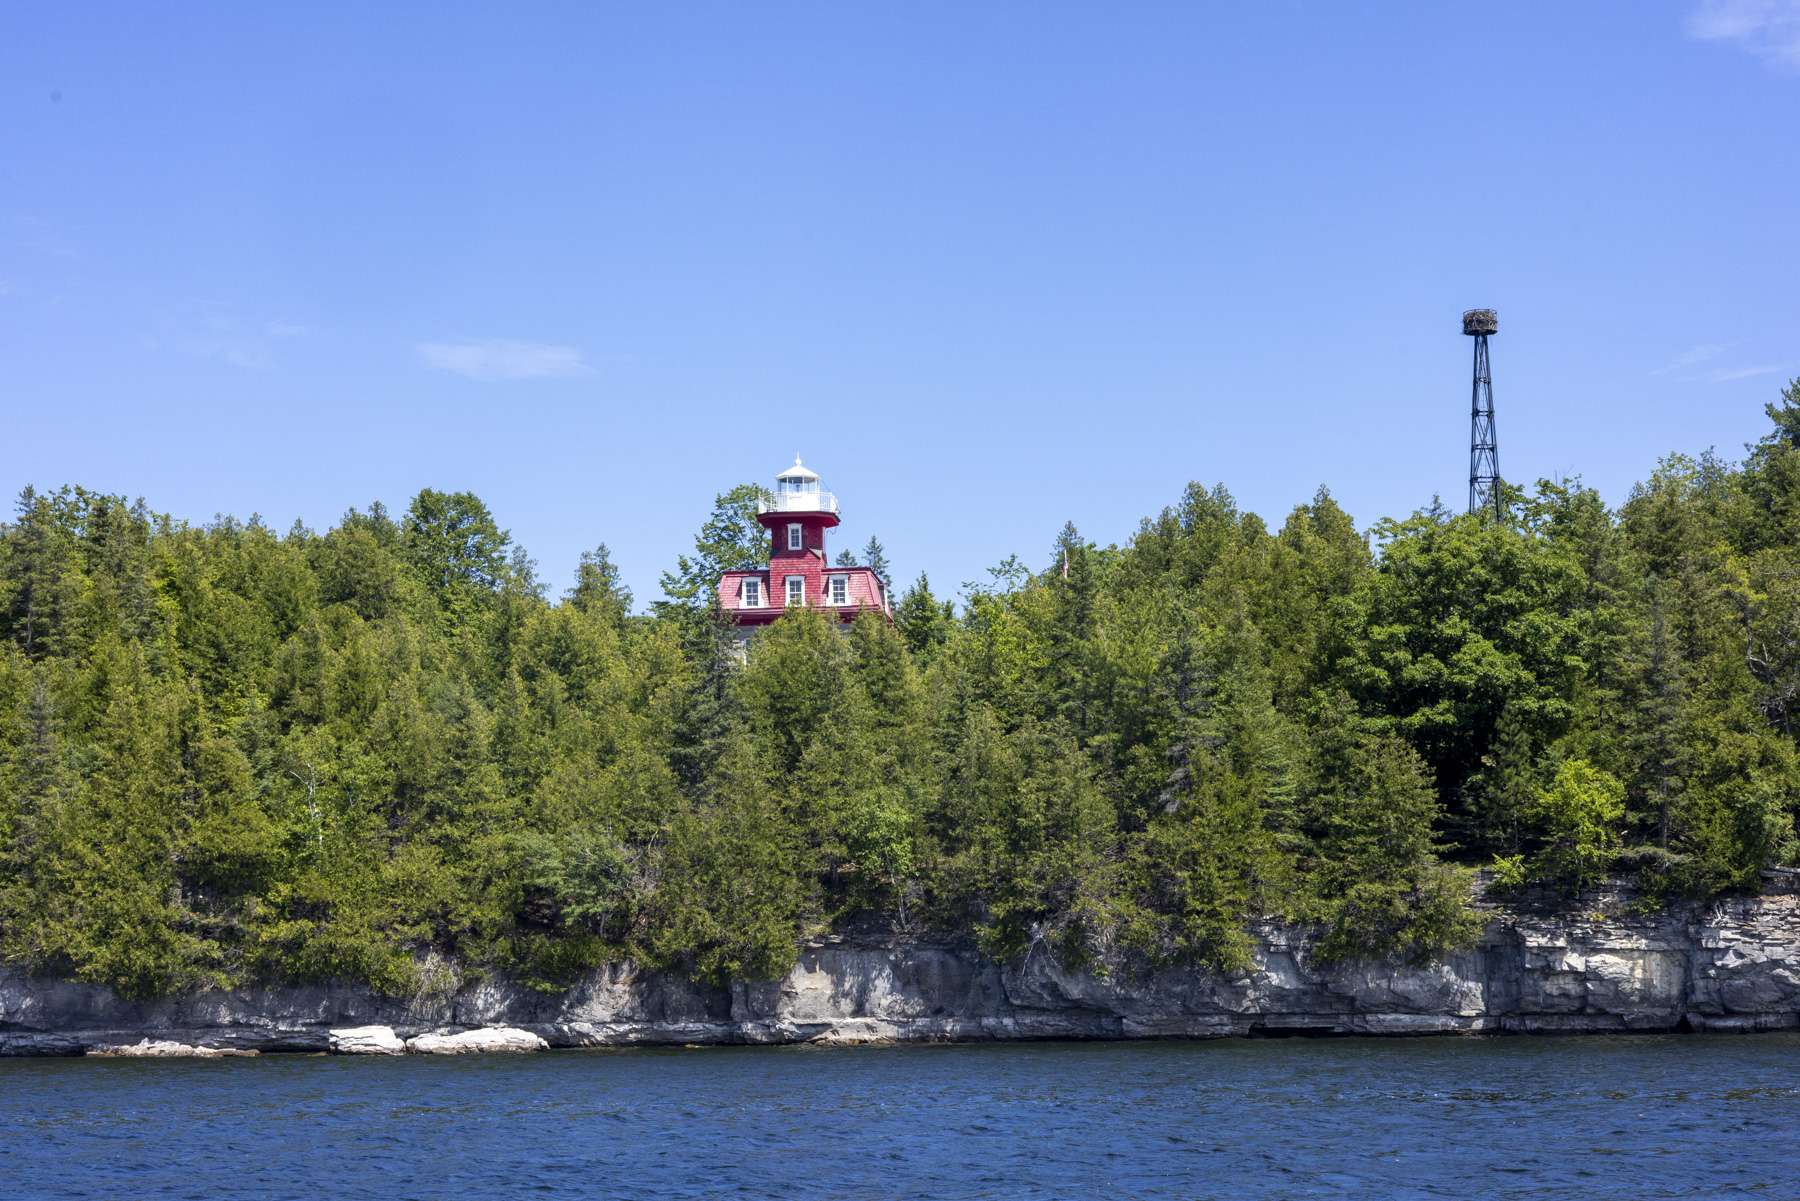 The historic lighthouse on Valcour's Bluff Point was built in the late 1800s. 